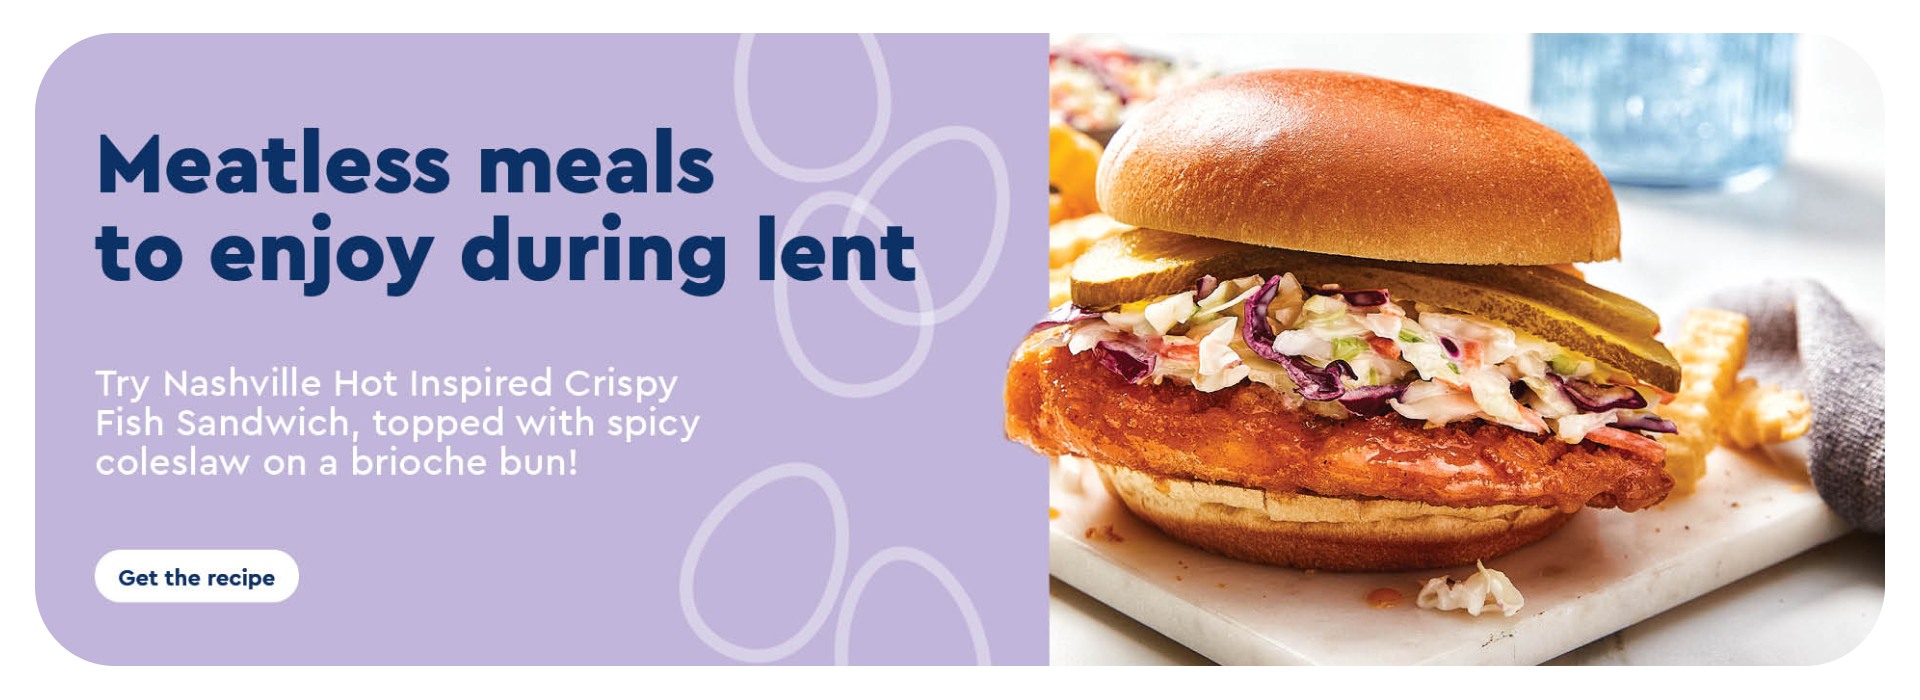 The following image contains the text, "Meatless meals to enjoy during Lent. Try Nashville hot-inspired crispy fish sandwich, topped with spicy coleslaw on a brioche bun! Along with the Get the recipe button."